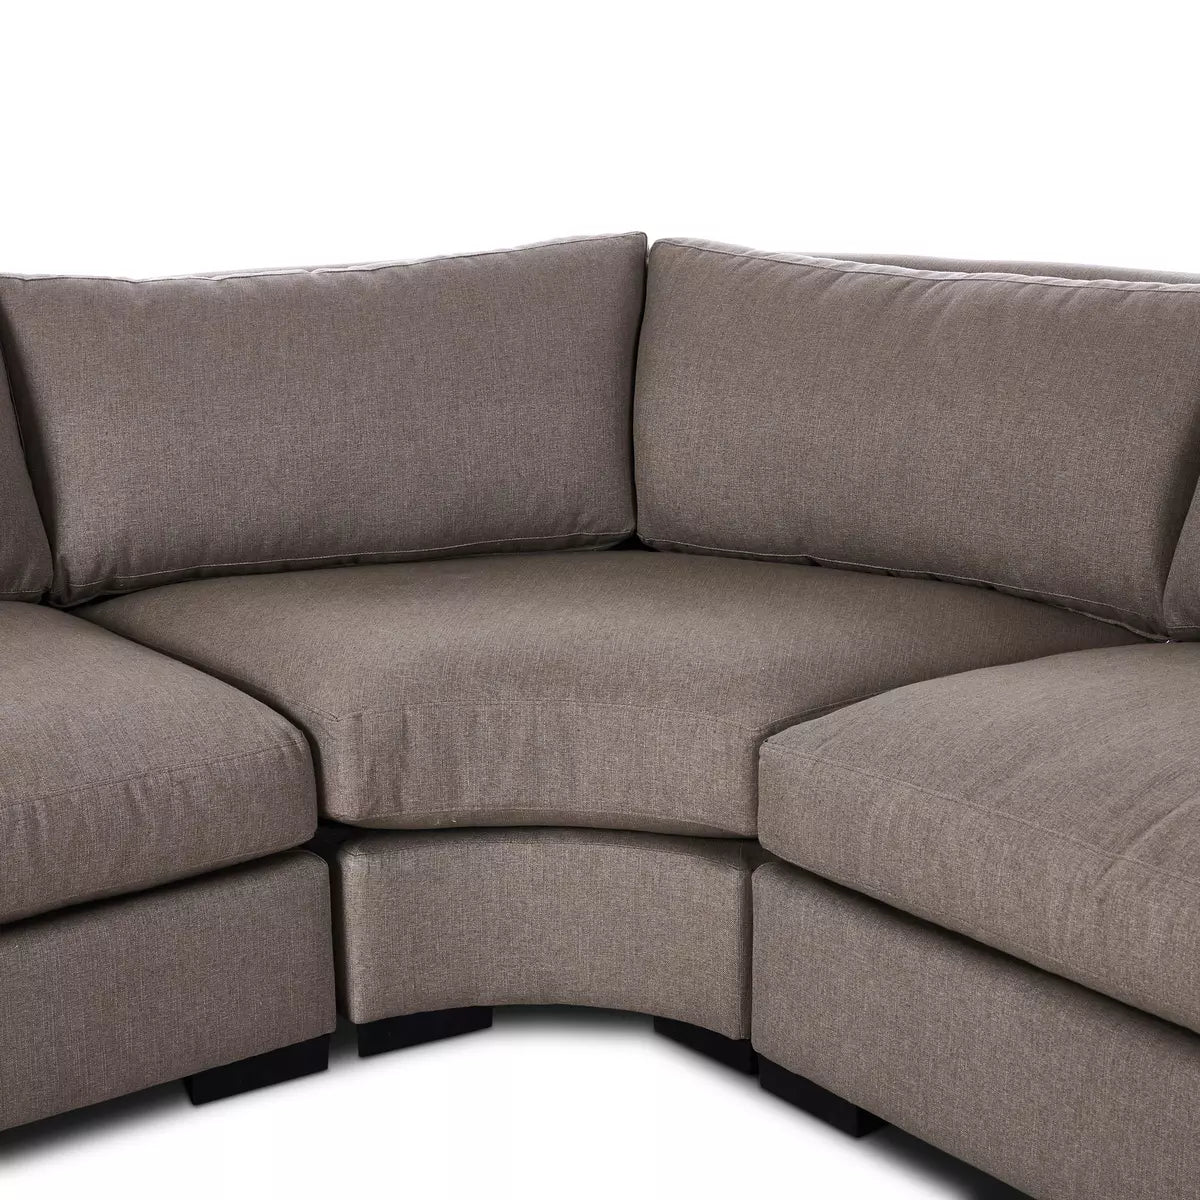 Albany 3-Piece Sectional Left Facing Bumper Chaise Vesuvio Cafe